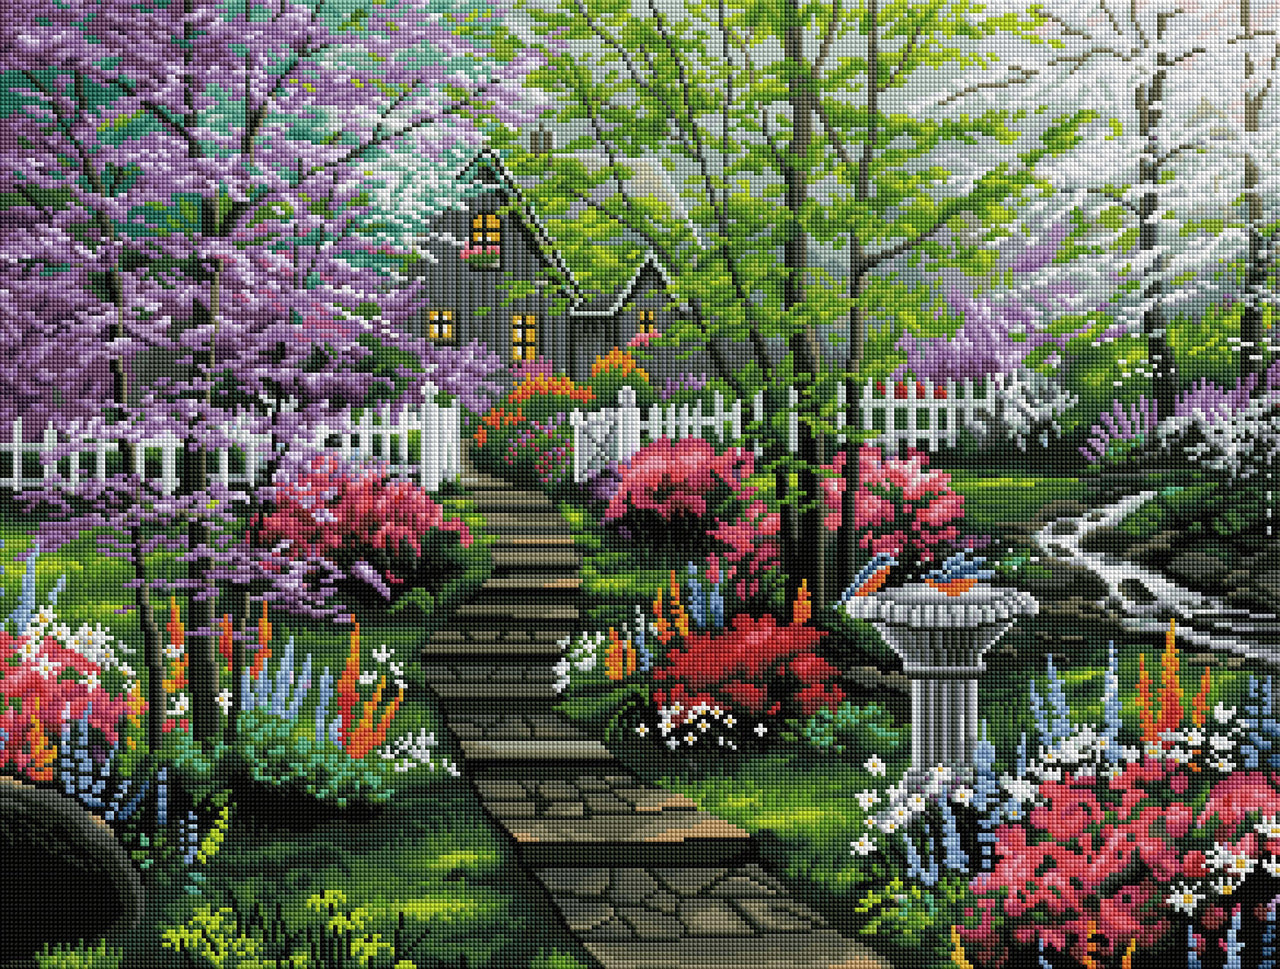 Diamond Painting Springtime Cottage 29" x 22" (74cm x 56cm) / Square with 54 Colors including 5 ABs / 64,532